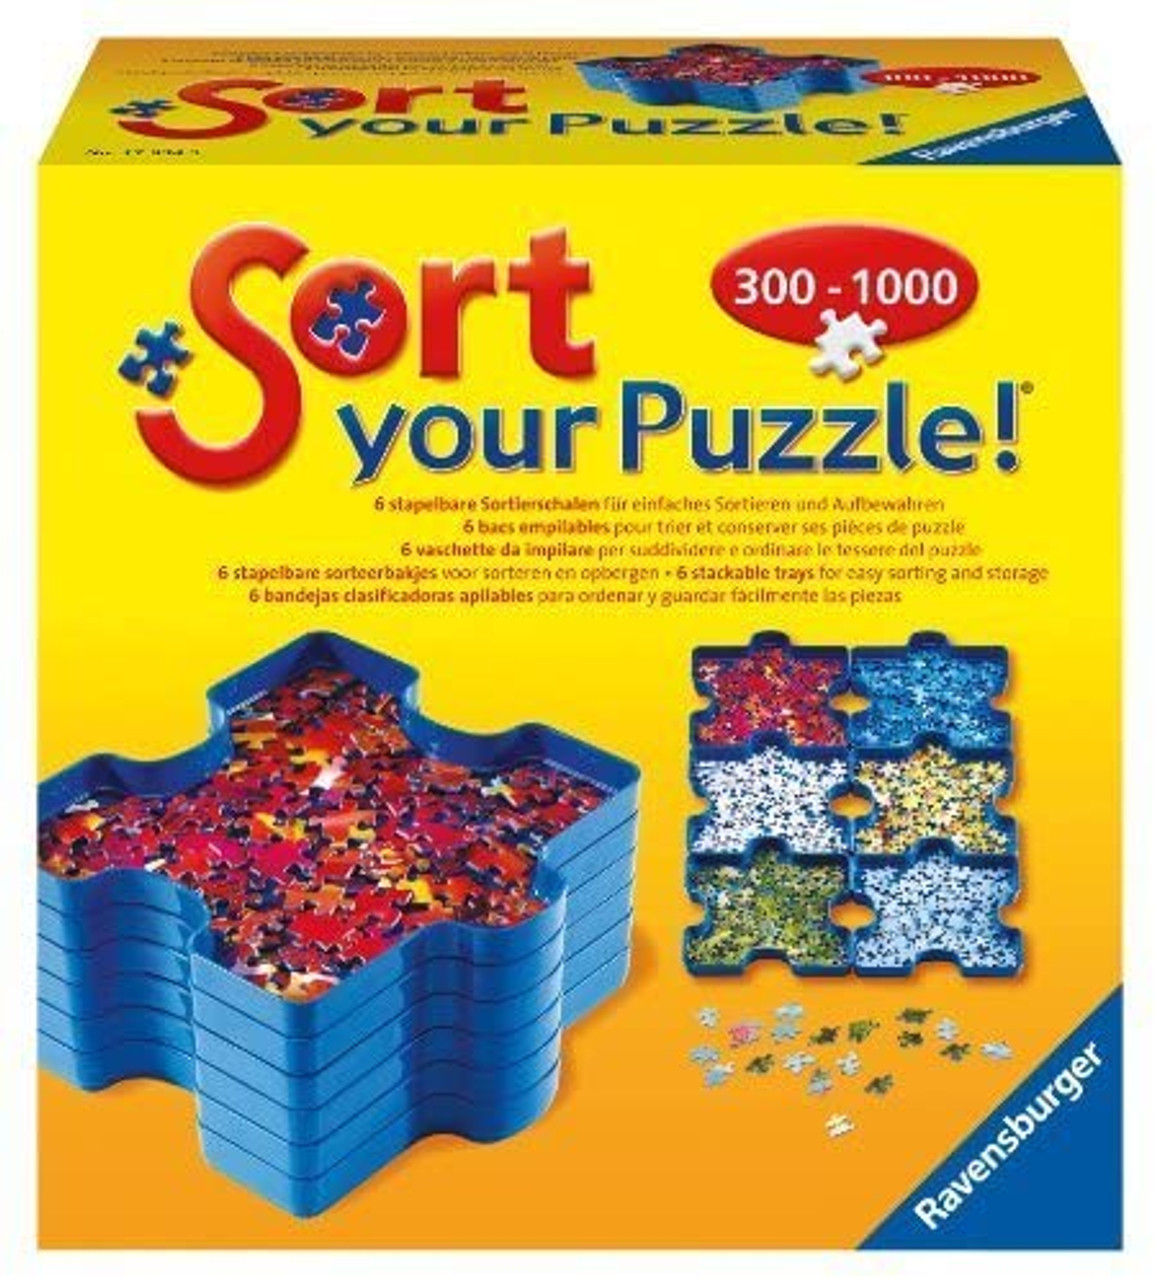 Sort & Go! 6 Puzzle Sorting Trays  Ravensburger - Tri-M Specialty Products